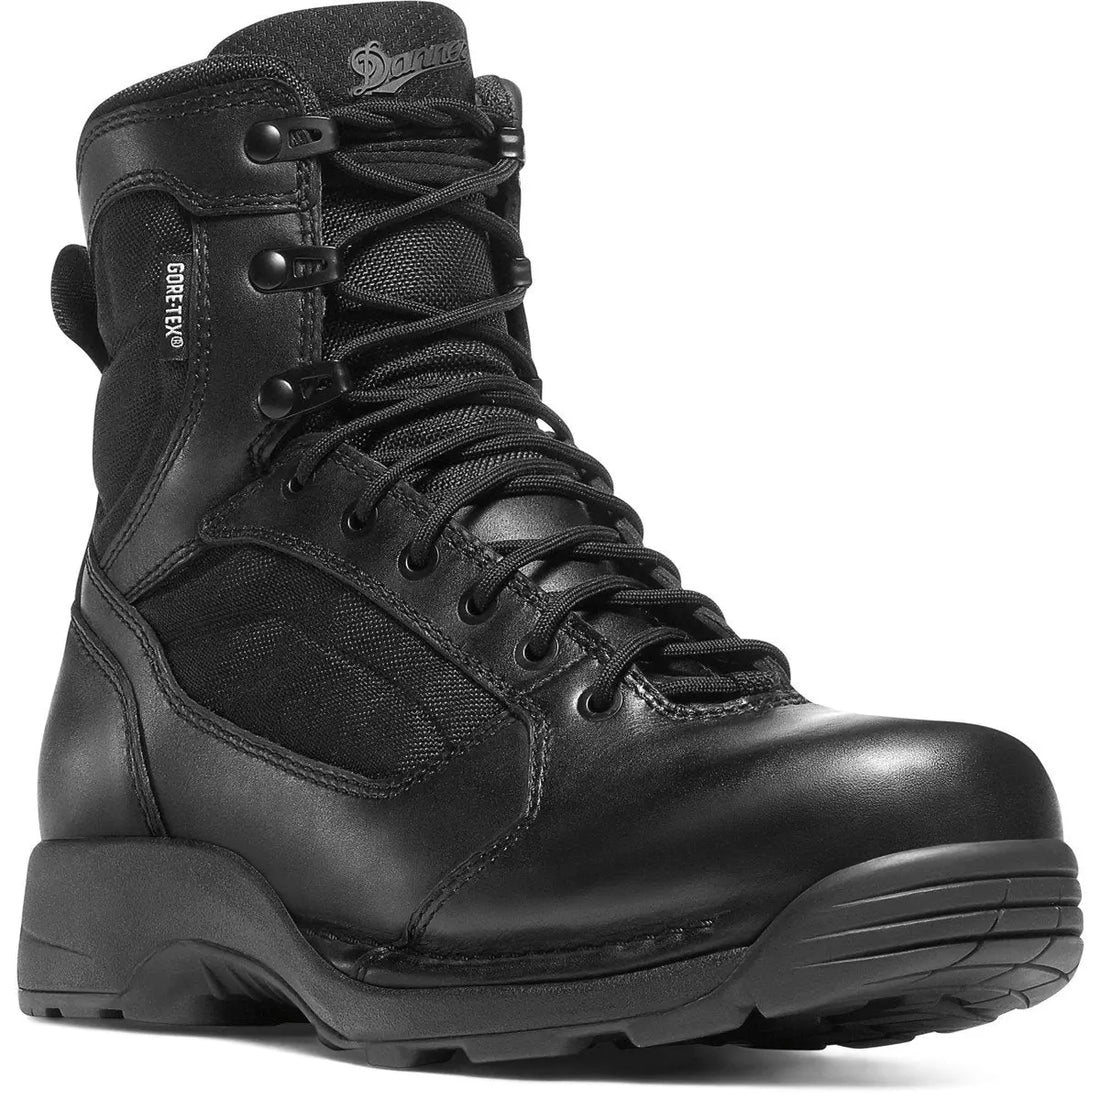 LAST DANNER BOOTS AT SPECIAL PRICE!